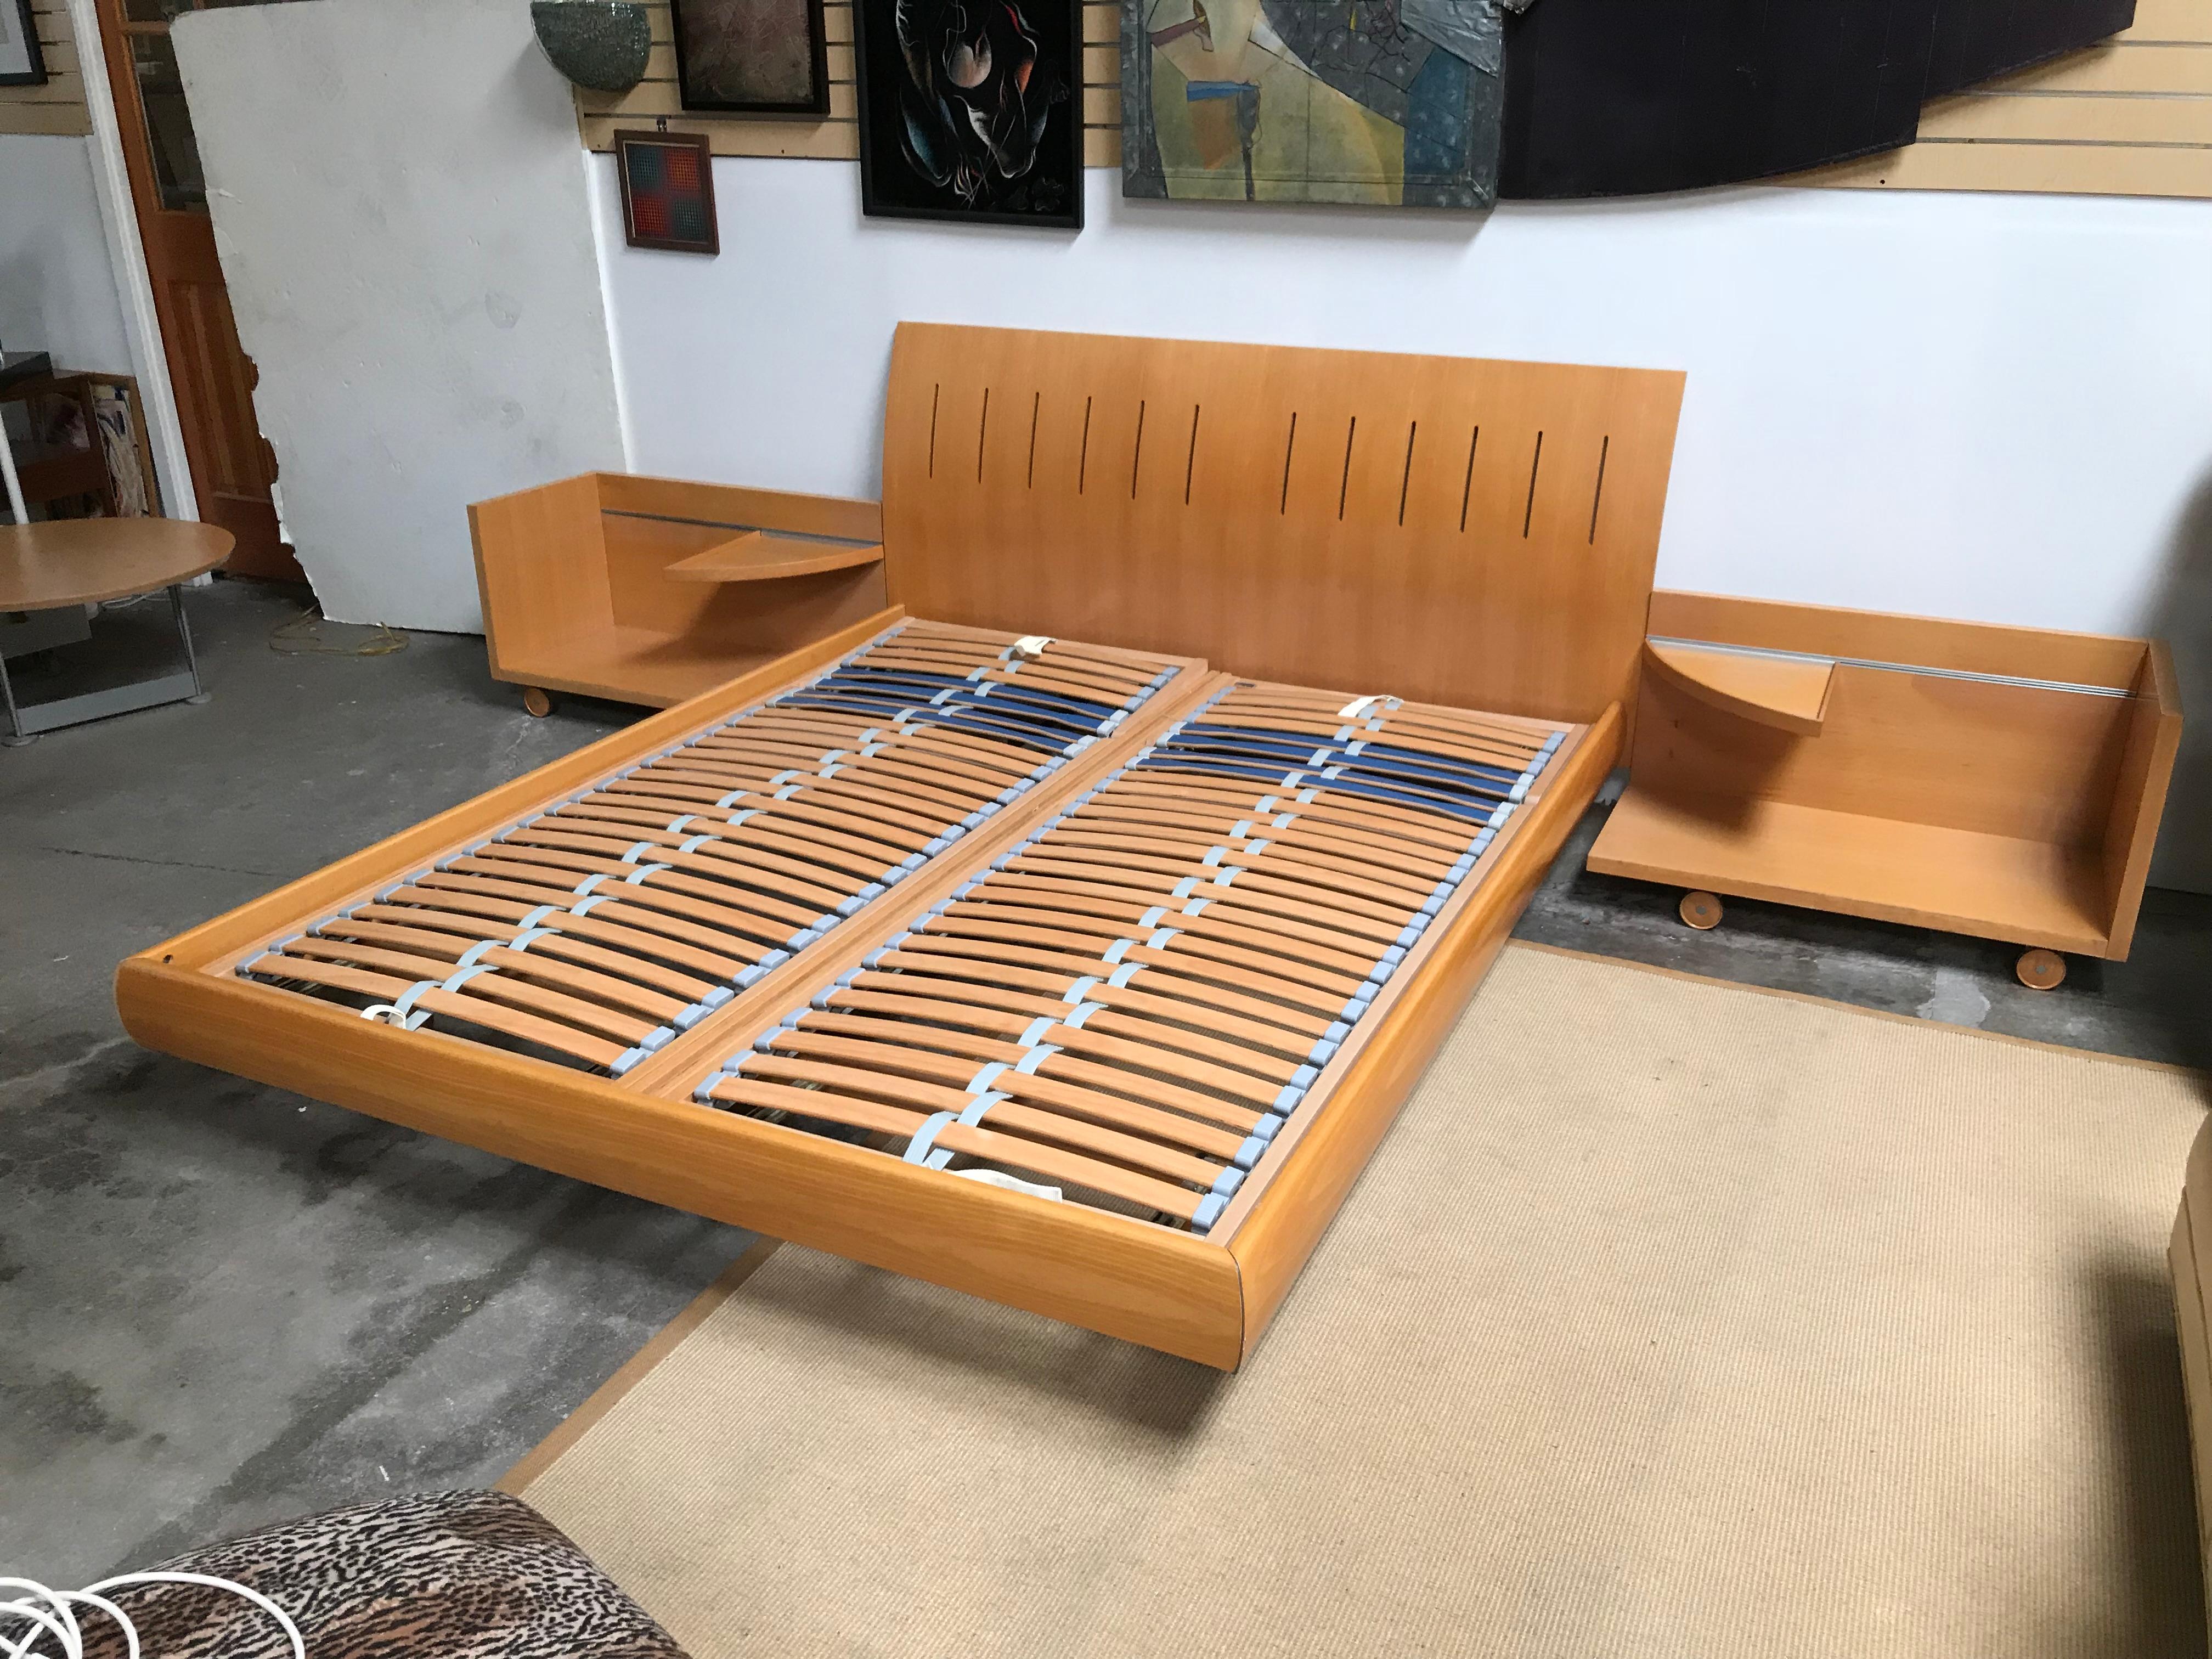 Contemporary maple wood platform bed set from French company Ligne Roset, with two side pieces on wheels. The platform is made of two twins beds inside the bed frame. A good way to sleep peacefully, without being disturb by one's partner!
Ligne